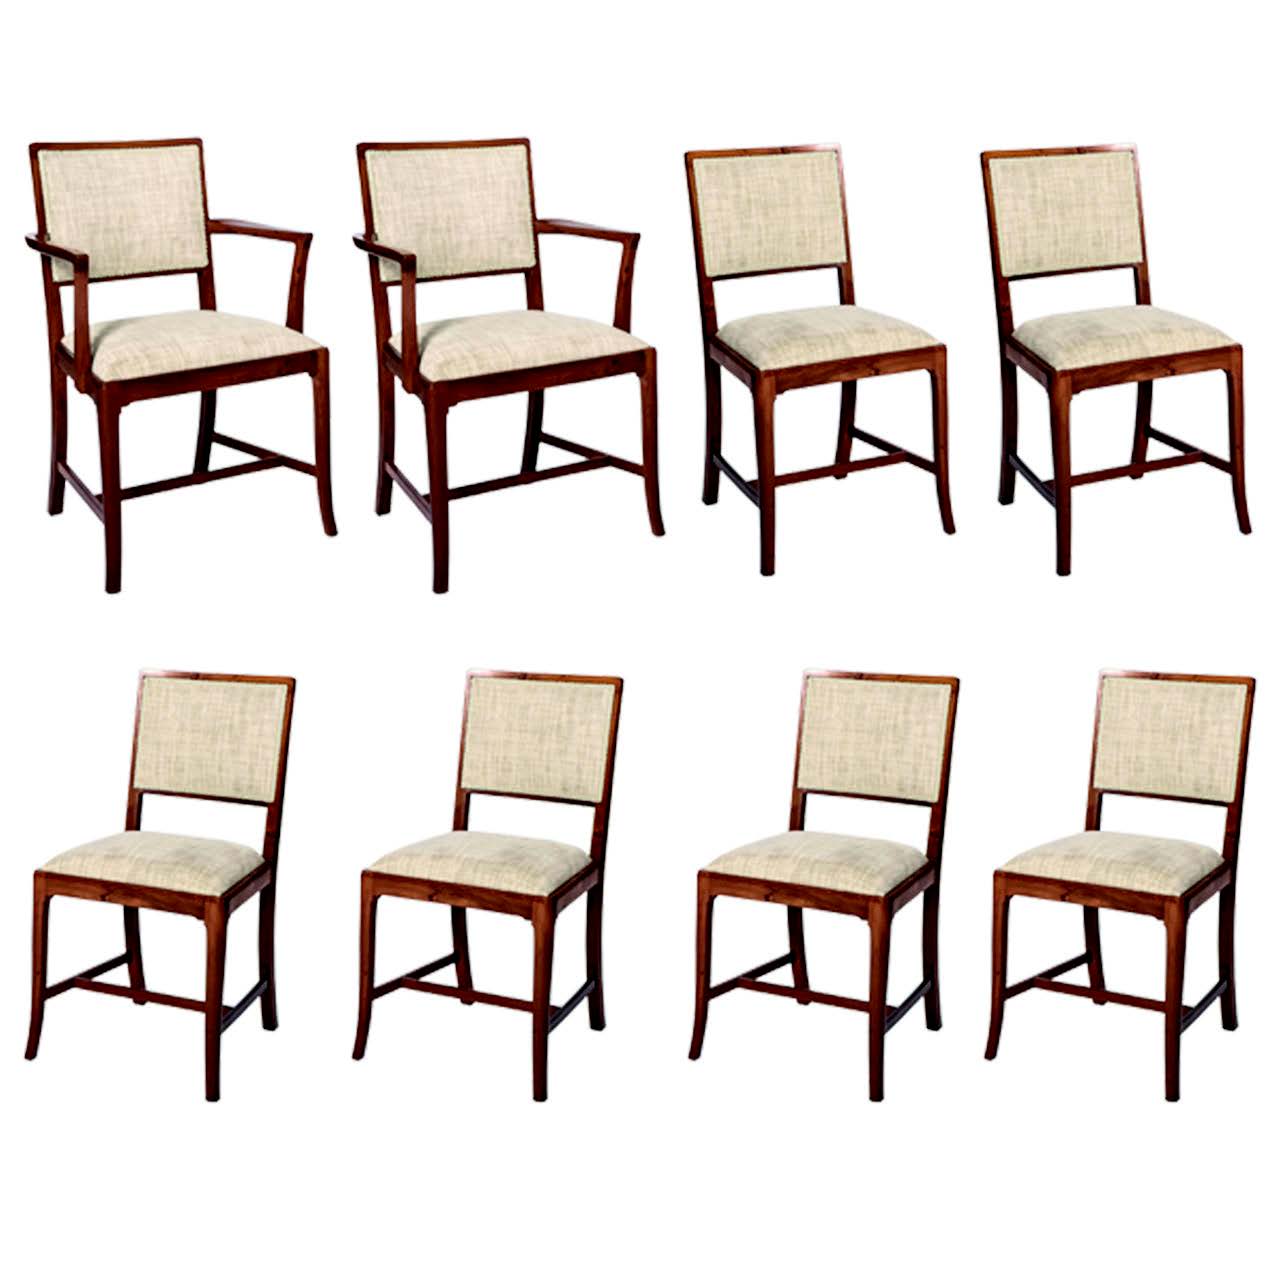 A set of eight yew dining chairs by Heal’s of London, c. 1930